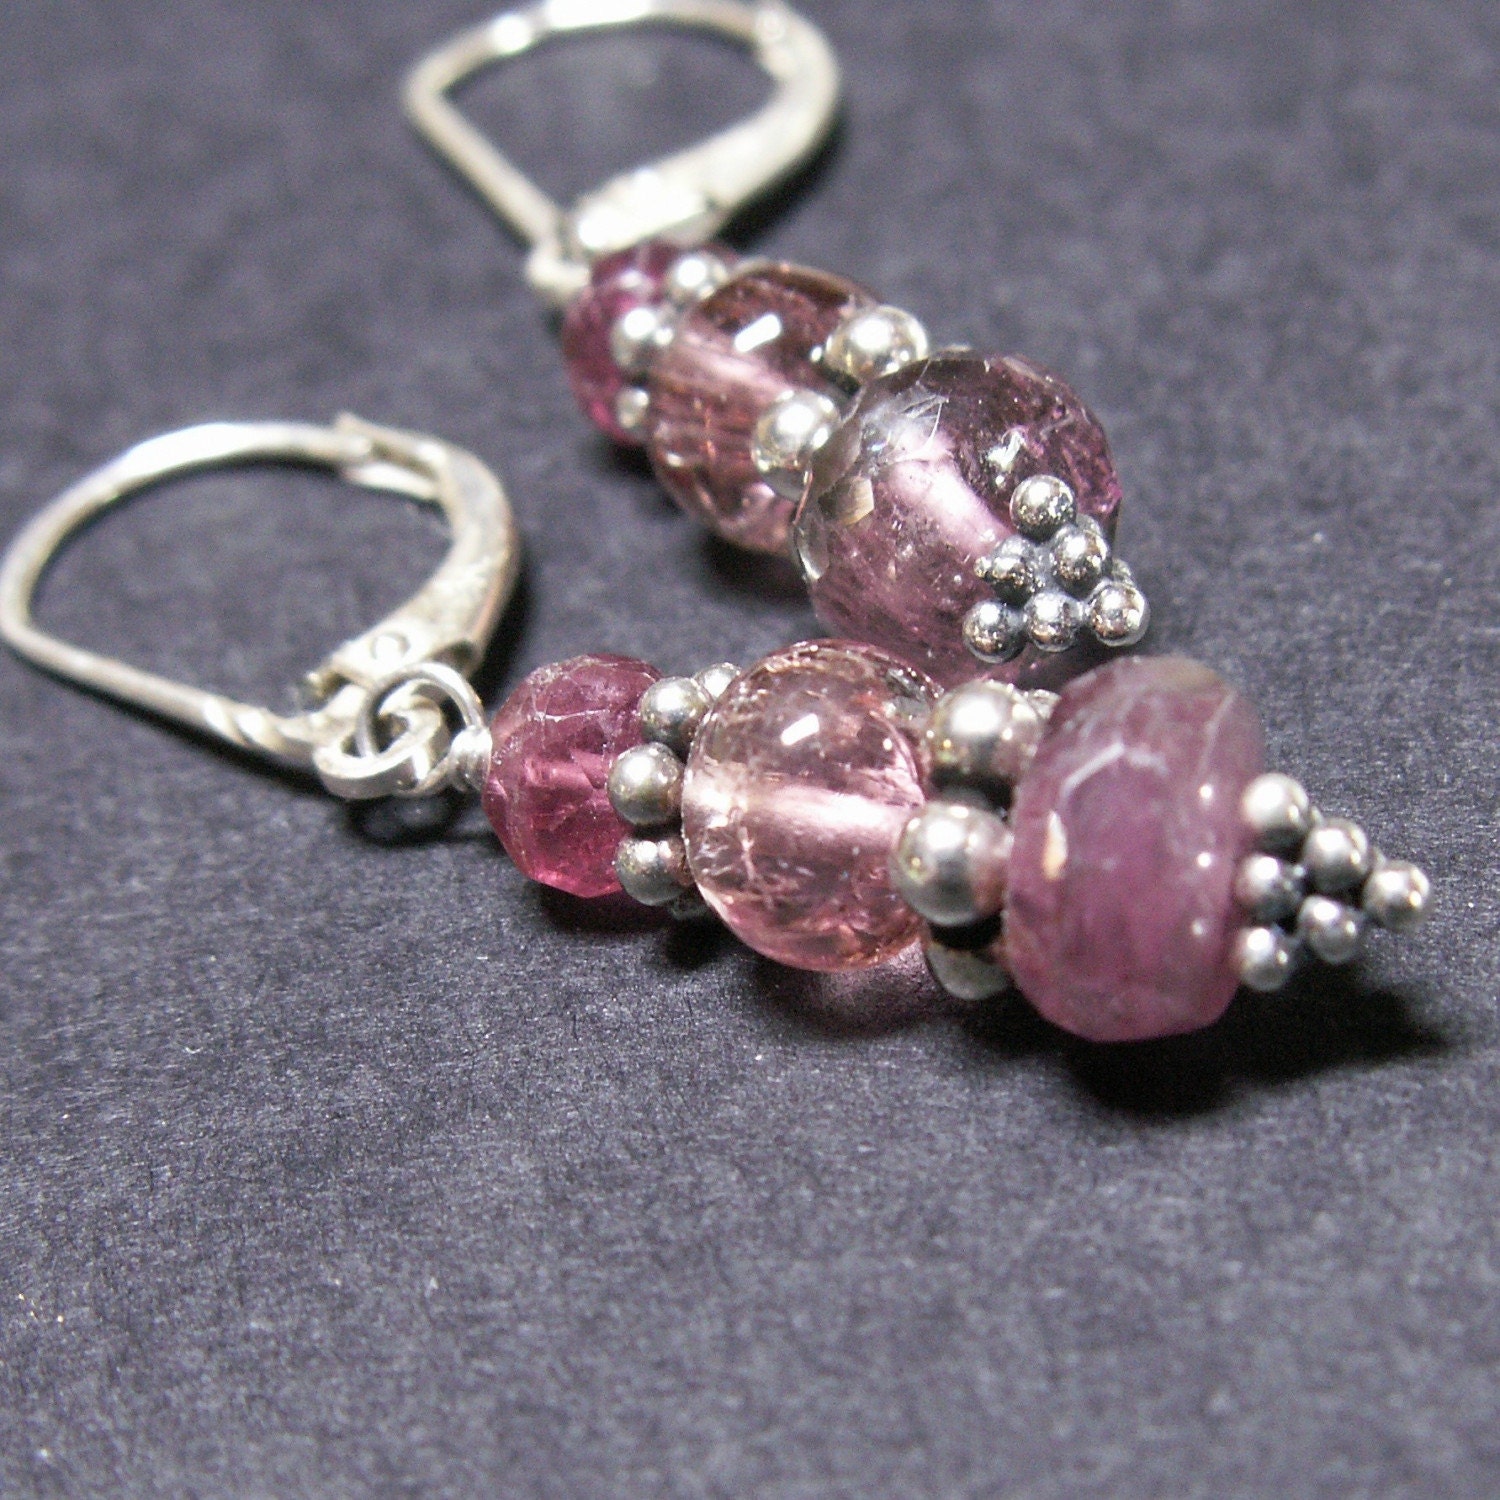 handcrafted earrings jewelry pink tourmaline sterling silver leverback